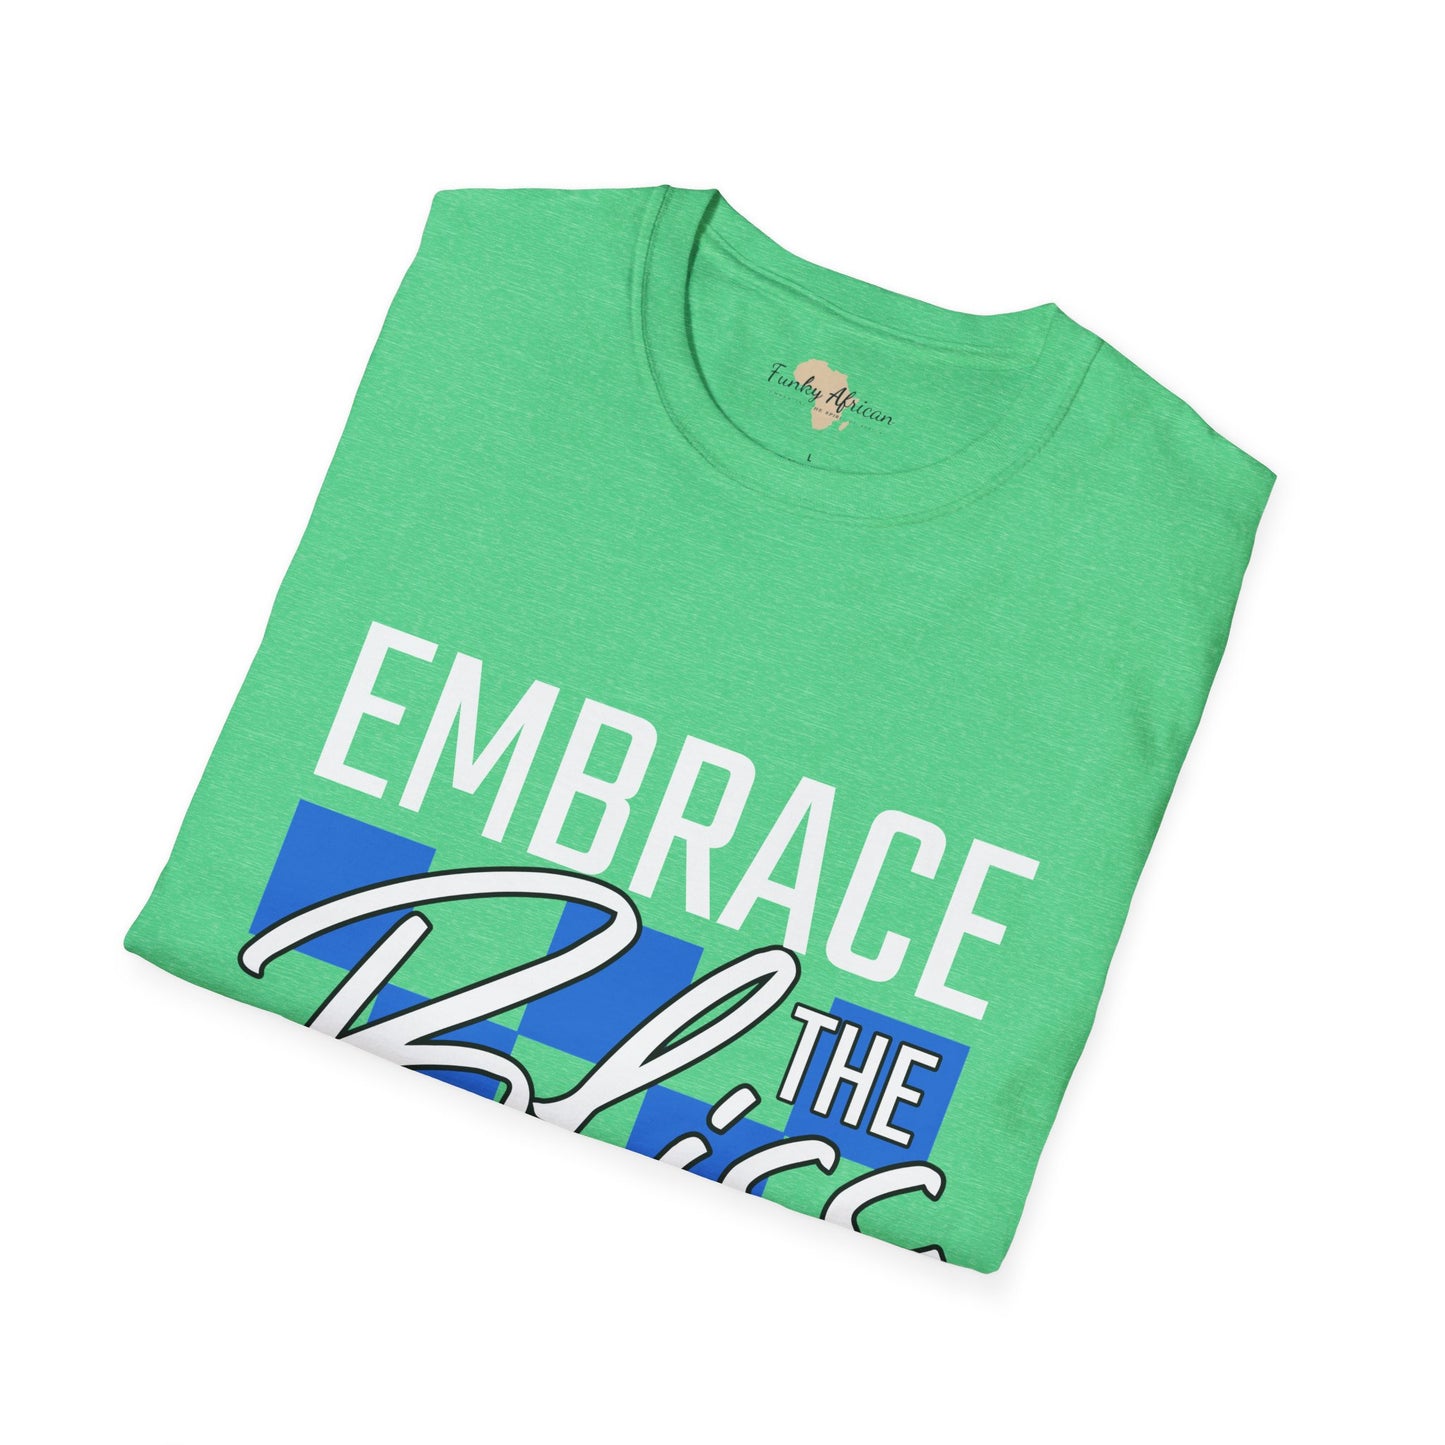 Embrace the bliss within unisex tee